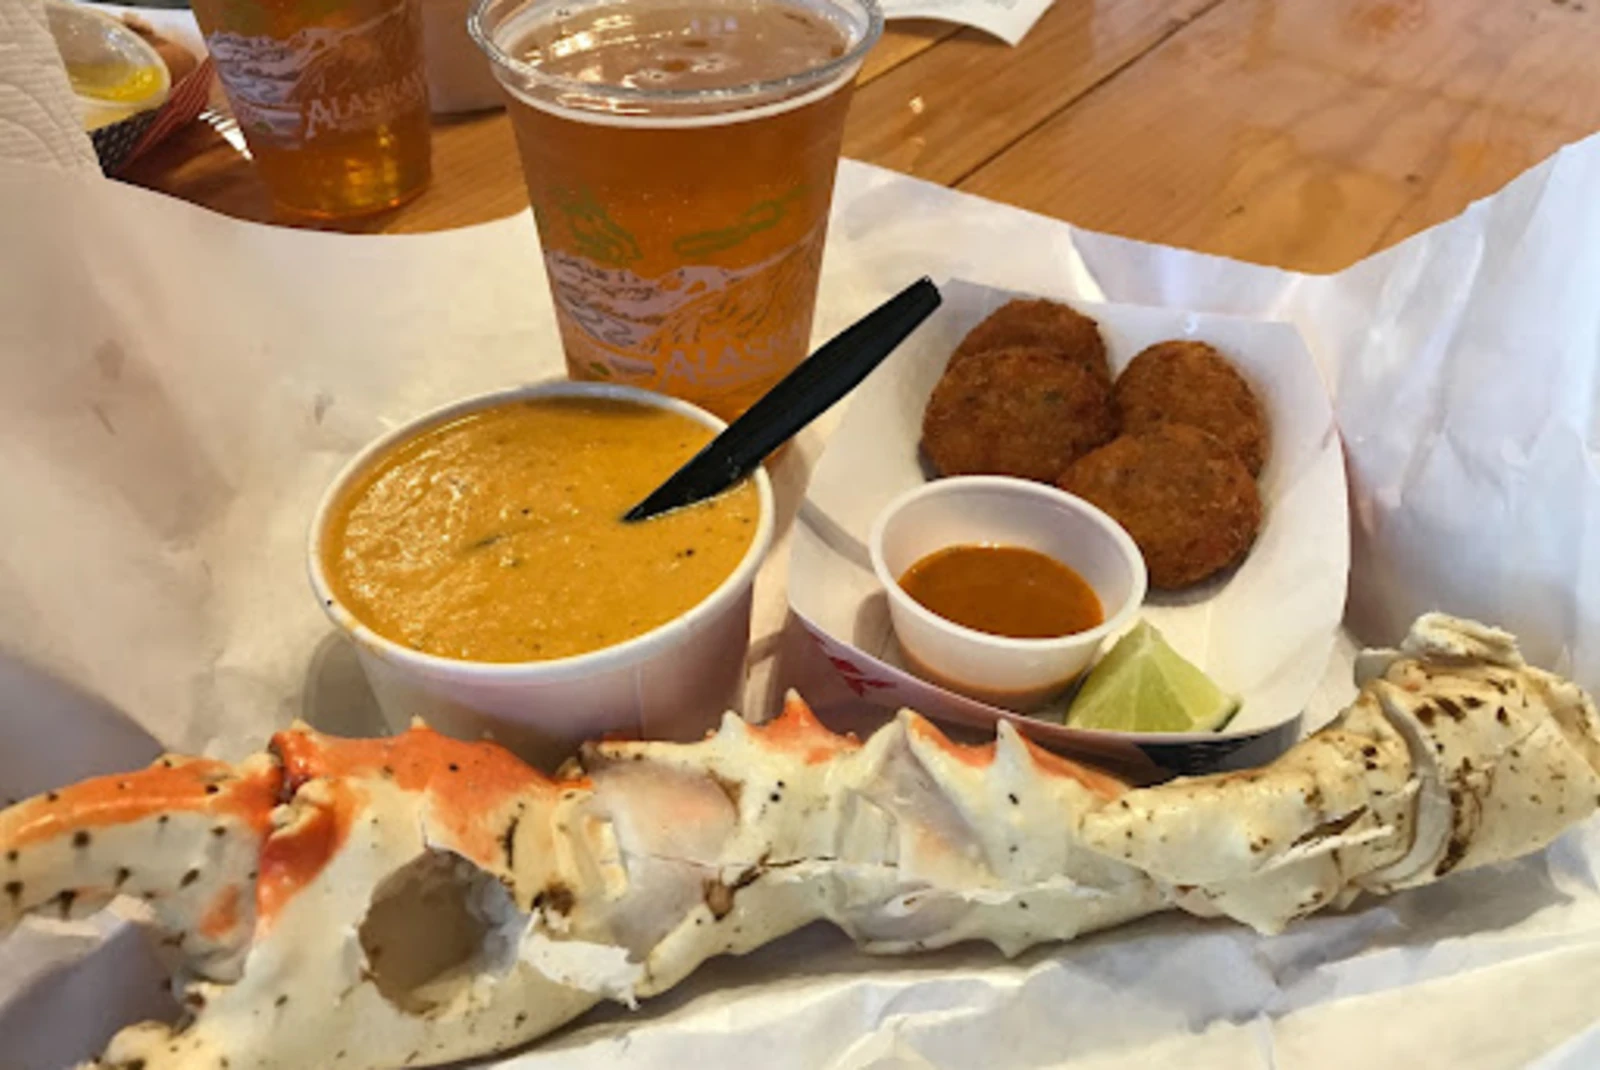 Platter of seafood with cup of soup and cup of beer